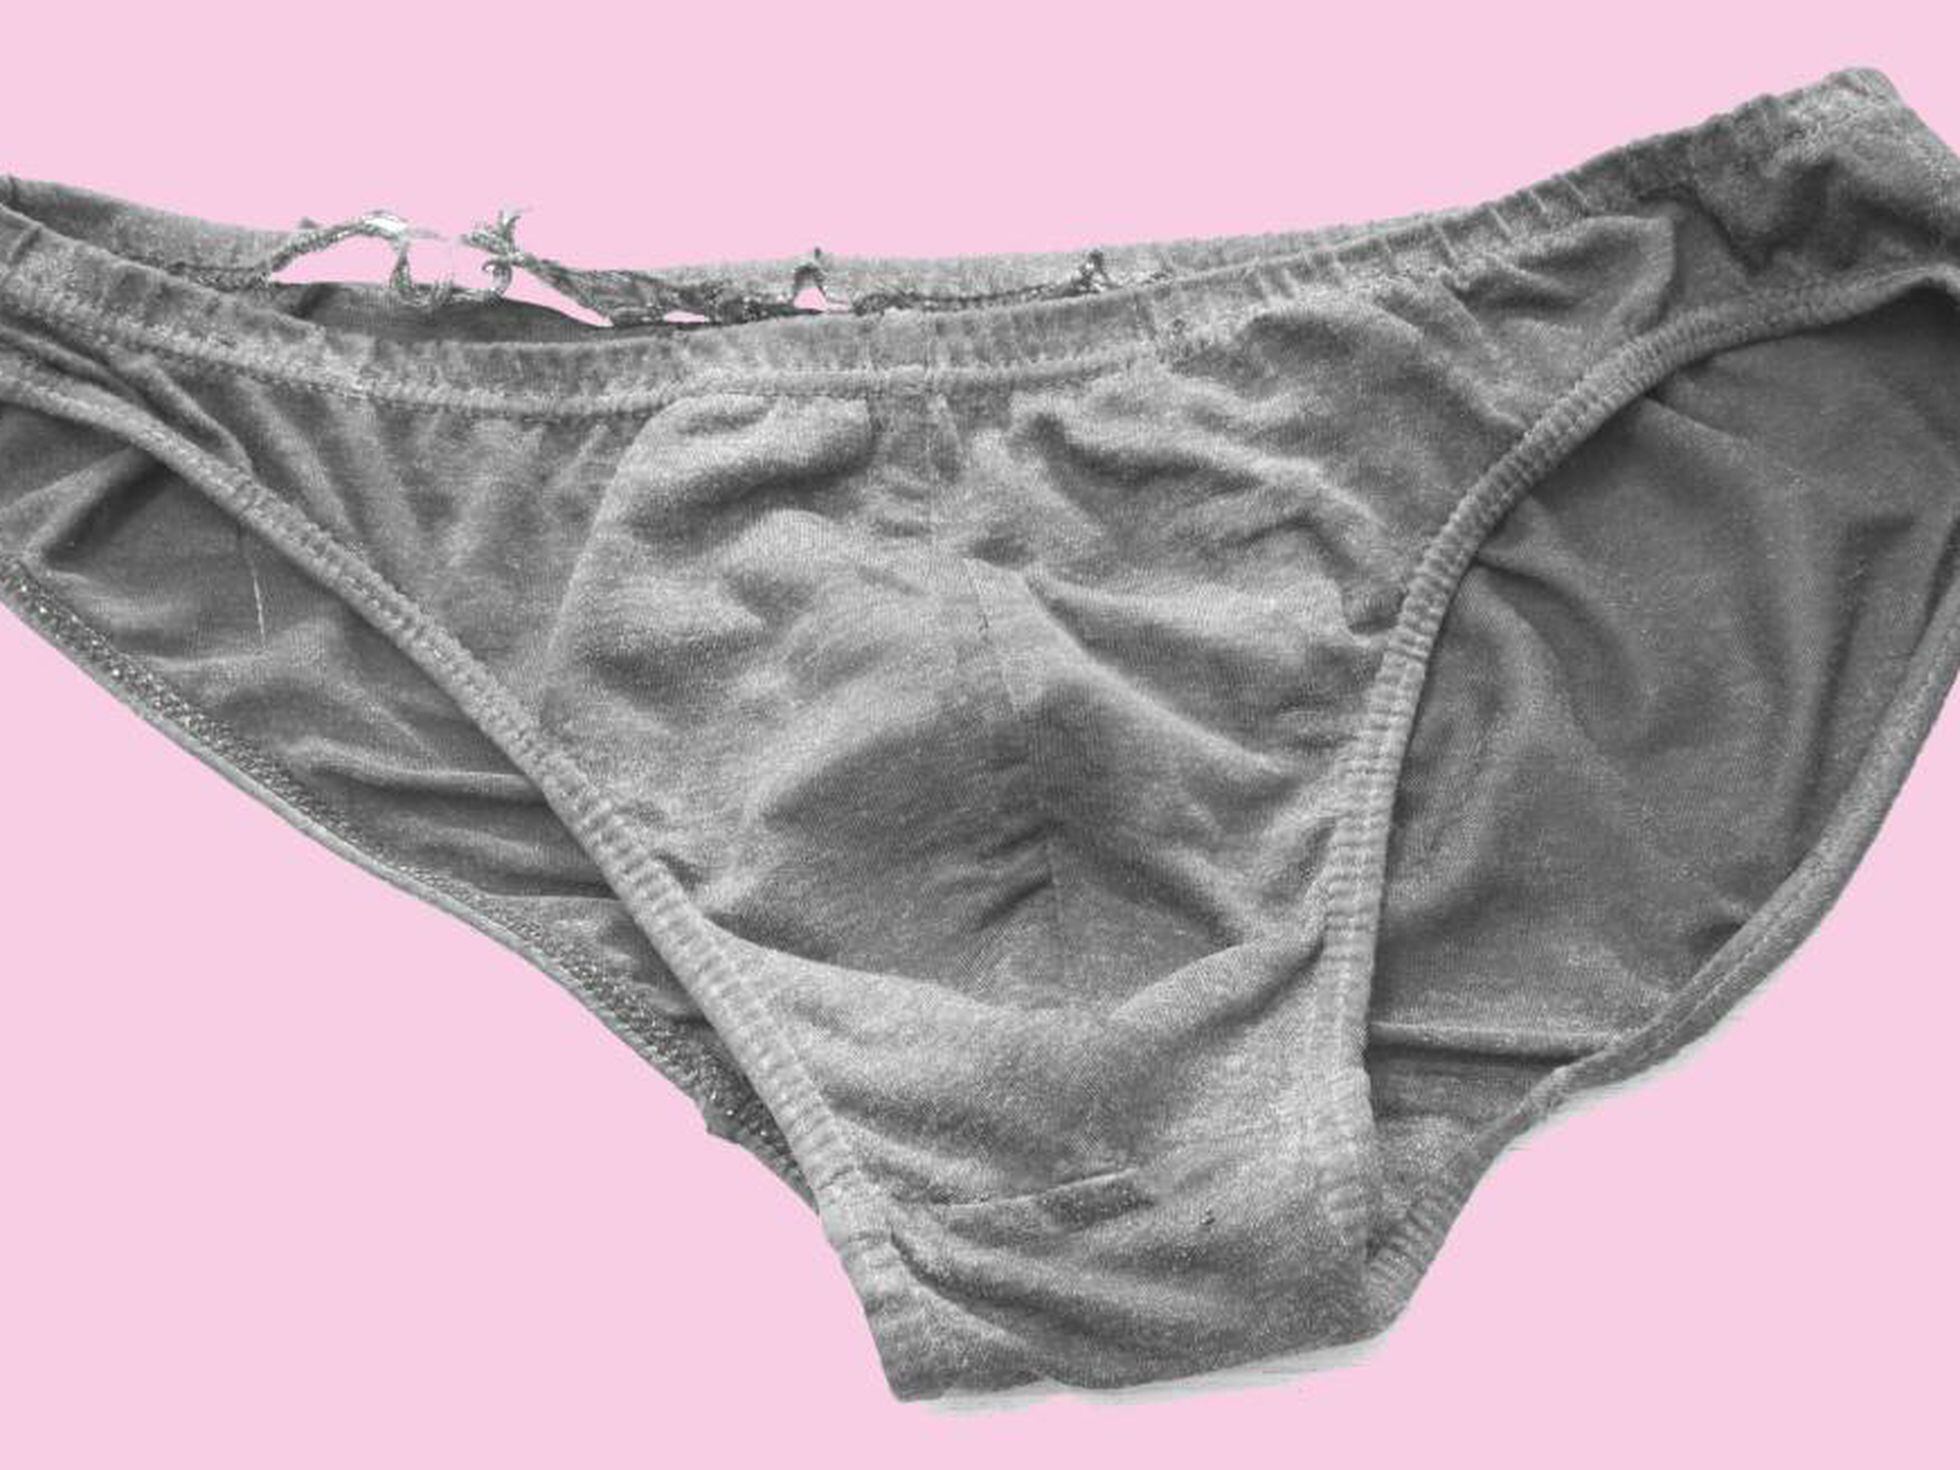 Who still wears tighty whities? - Quora